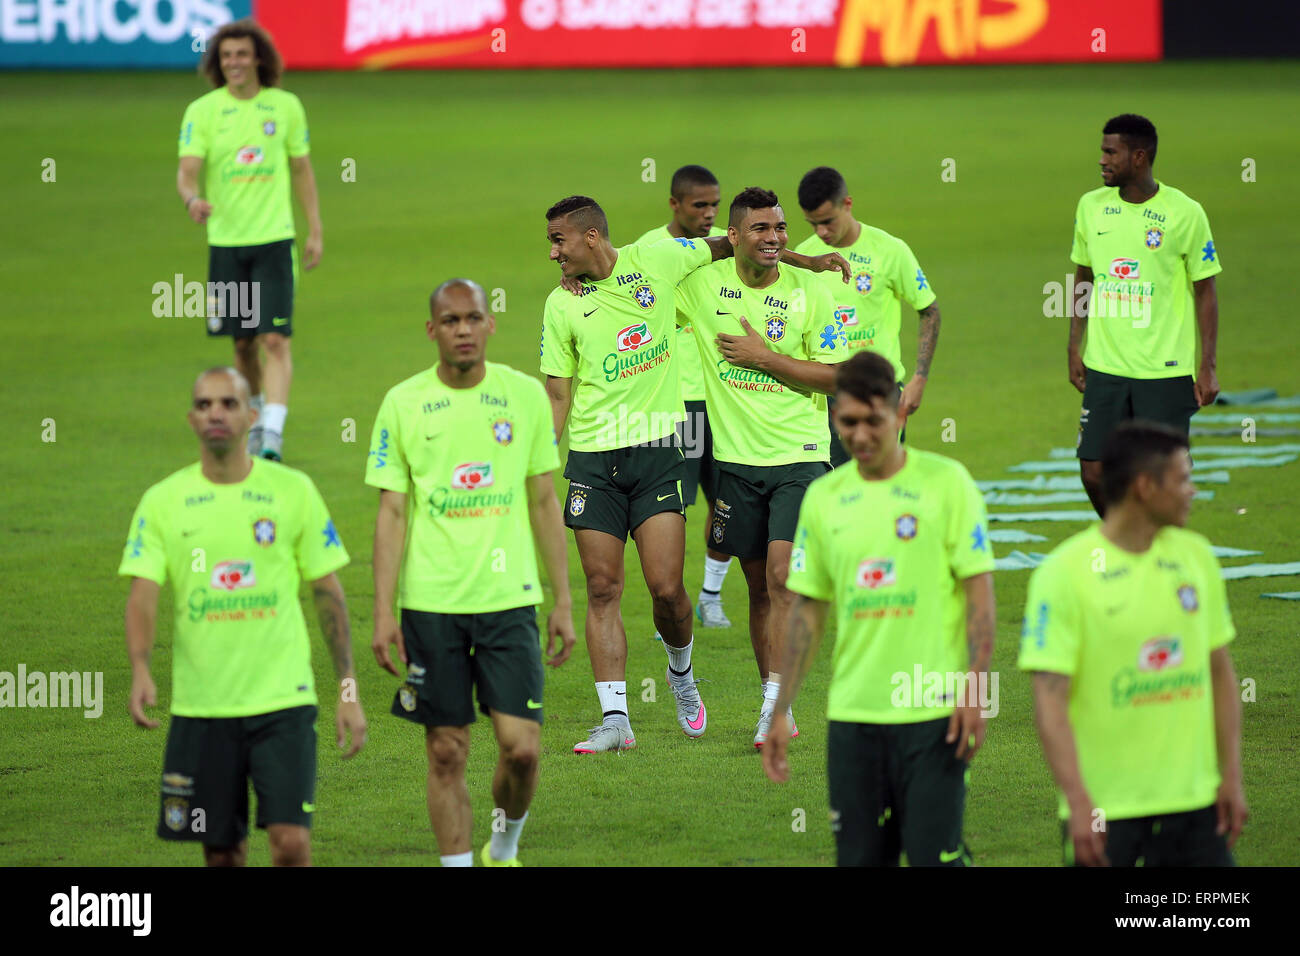 Sao Paulo, Brazil. 6th June, 2015. Players of Brazil's national soccer team take part in a training session in Sao Paulo, Brazil, on June 6, 2015. Brazil will face Mexico in a friendly match on Sunday, before their participation in the Copa America 2015 finals, to be held in Chile from June 11 to July 4. © Rahel Patrasso/Xinhua/Alamy Live News Stock Photo